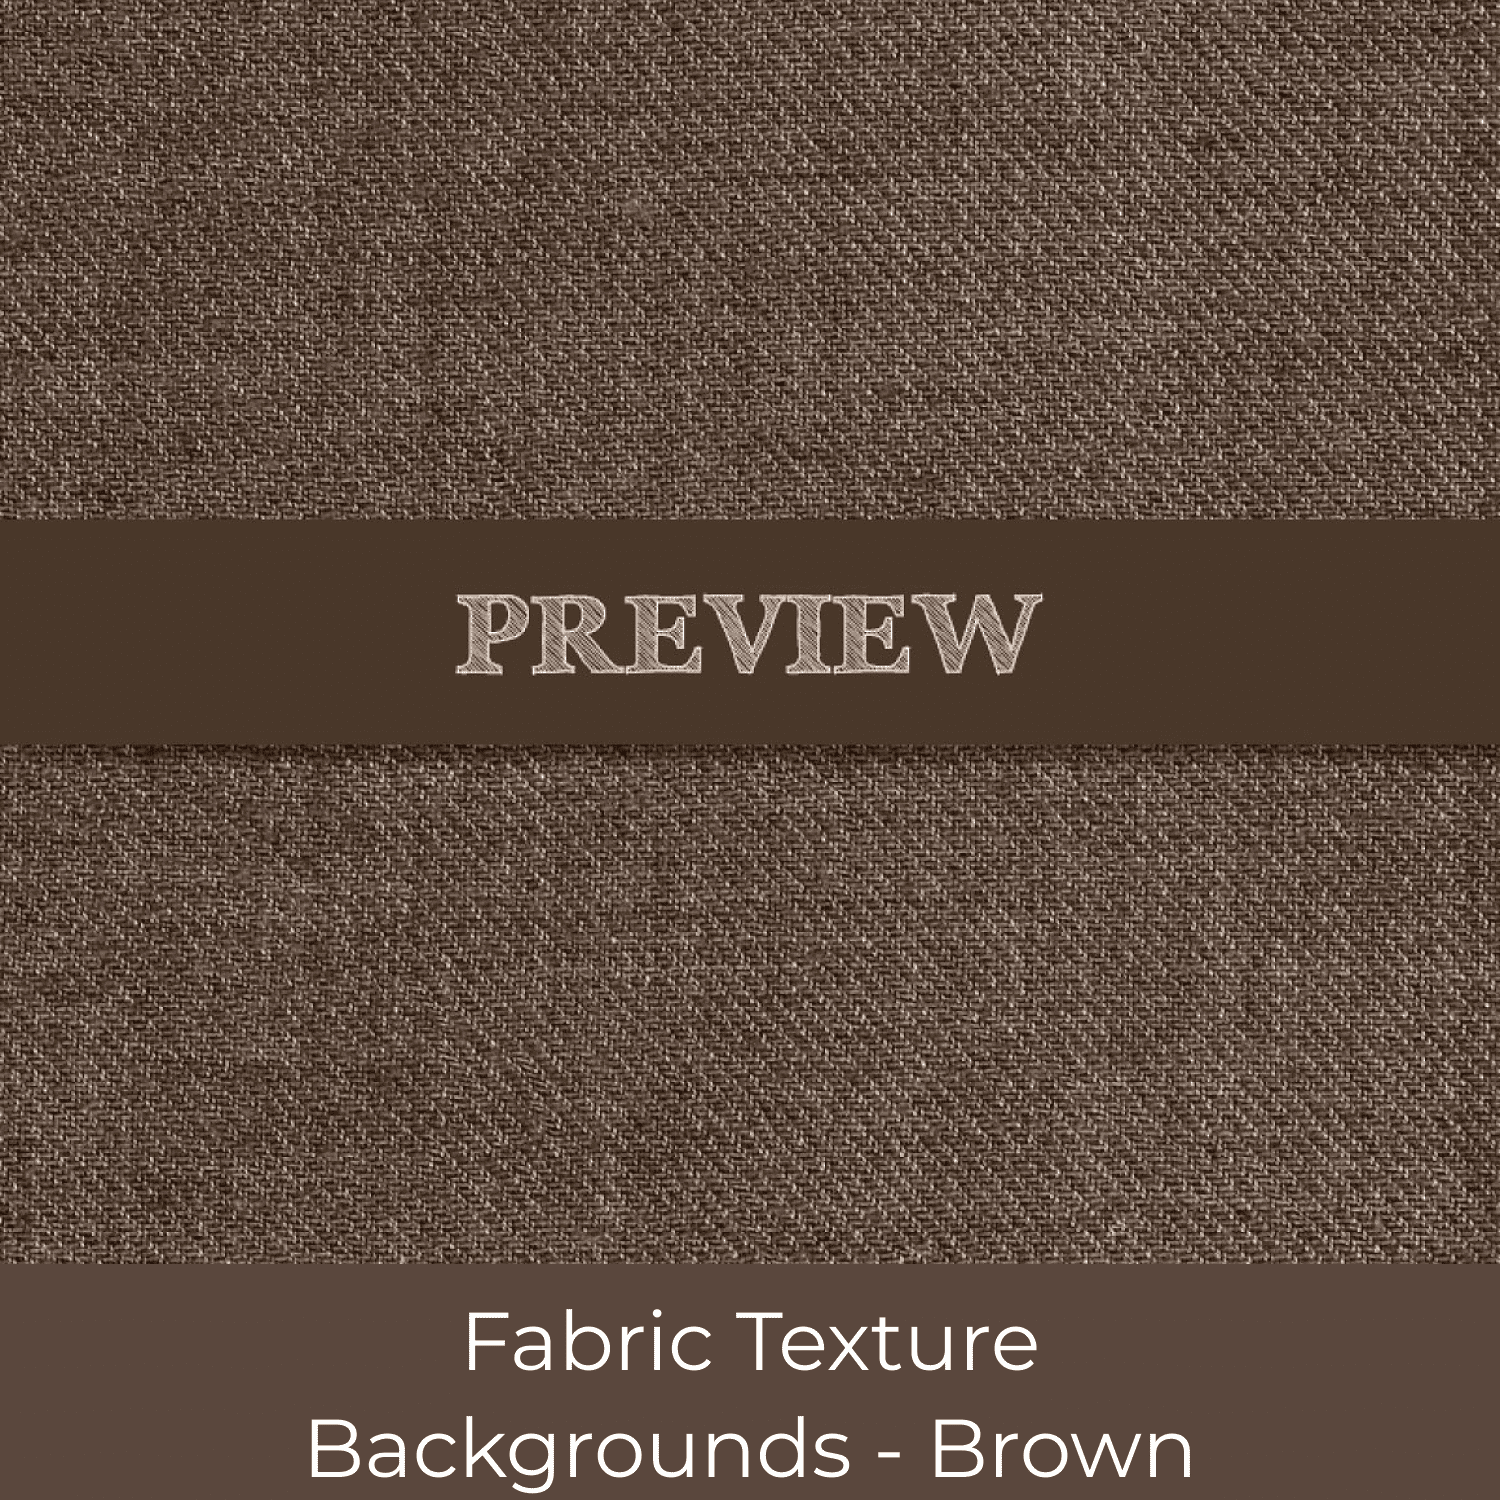 Fabric Texture Backgrounds - Brown cover.